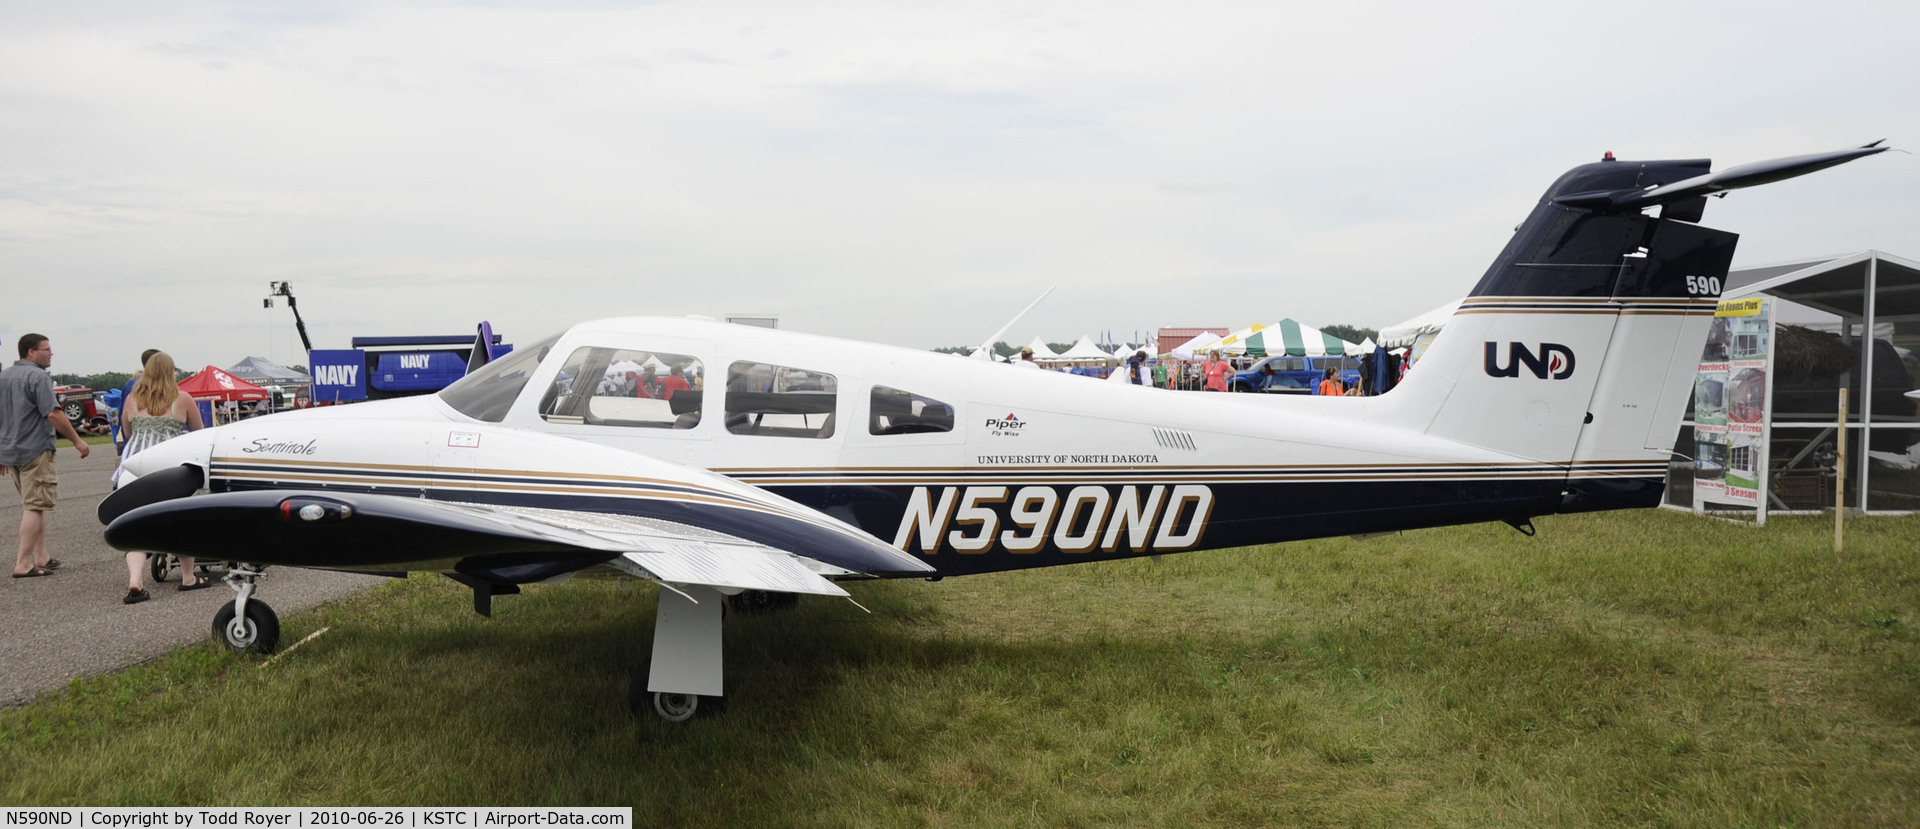 N590ND, 2009 Piper PA-44-180 Seminole C/N 4496269, on display at the 2010 Great Minnesota Air Show